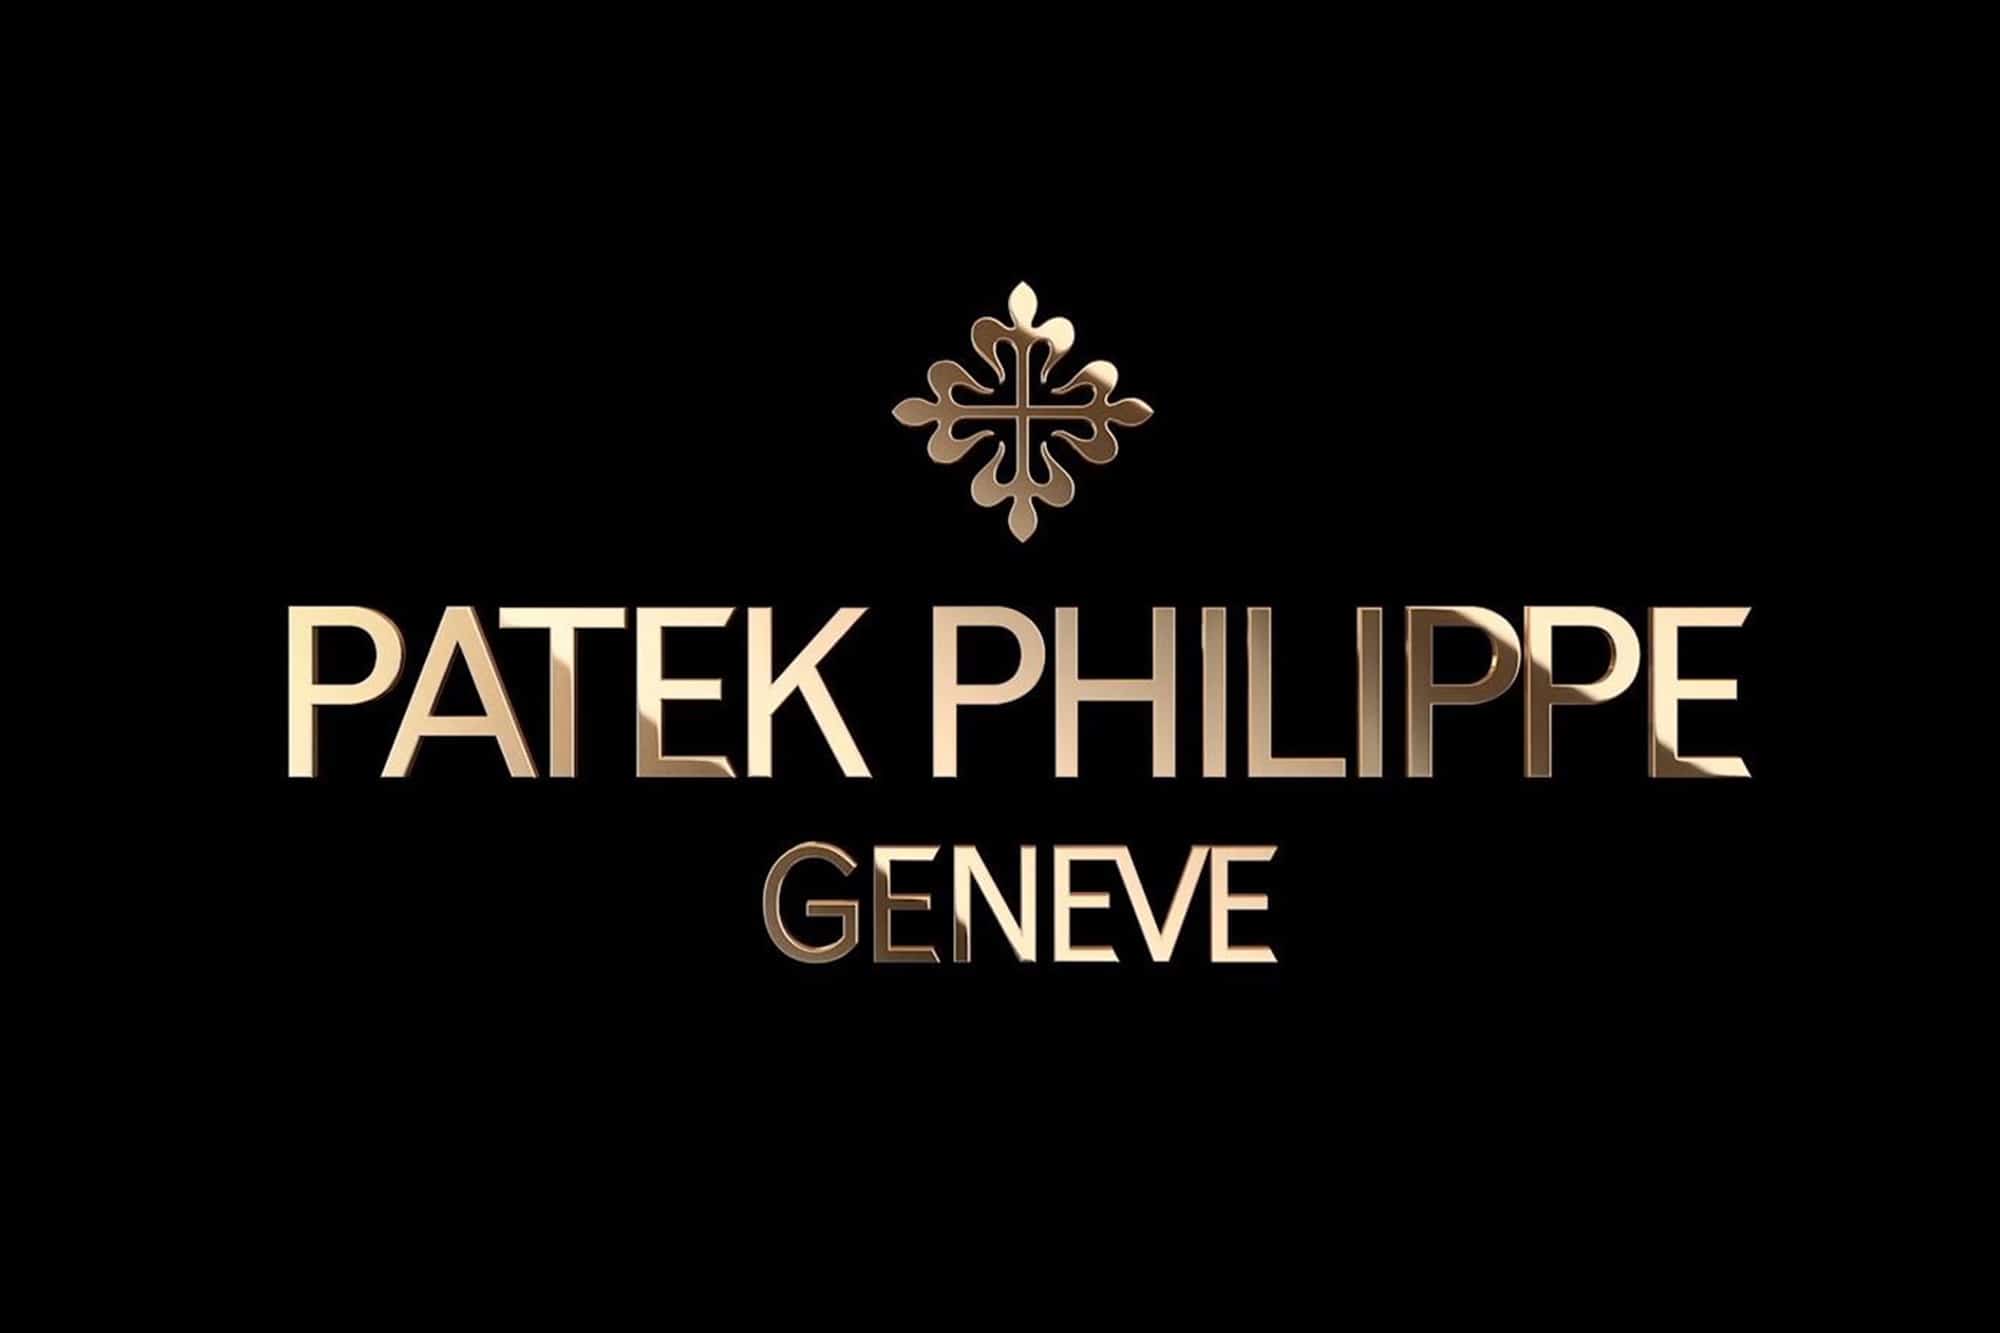 Around the Web: Patek Philippe to Postpone New Watch Releases Until 2021